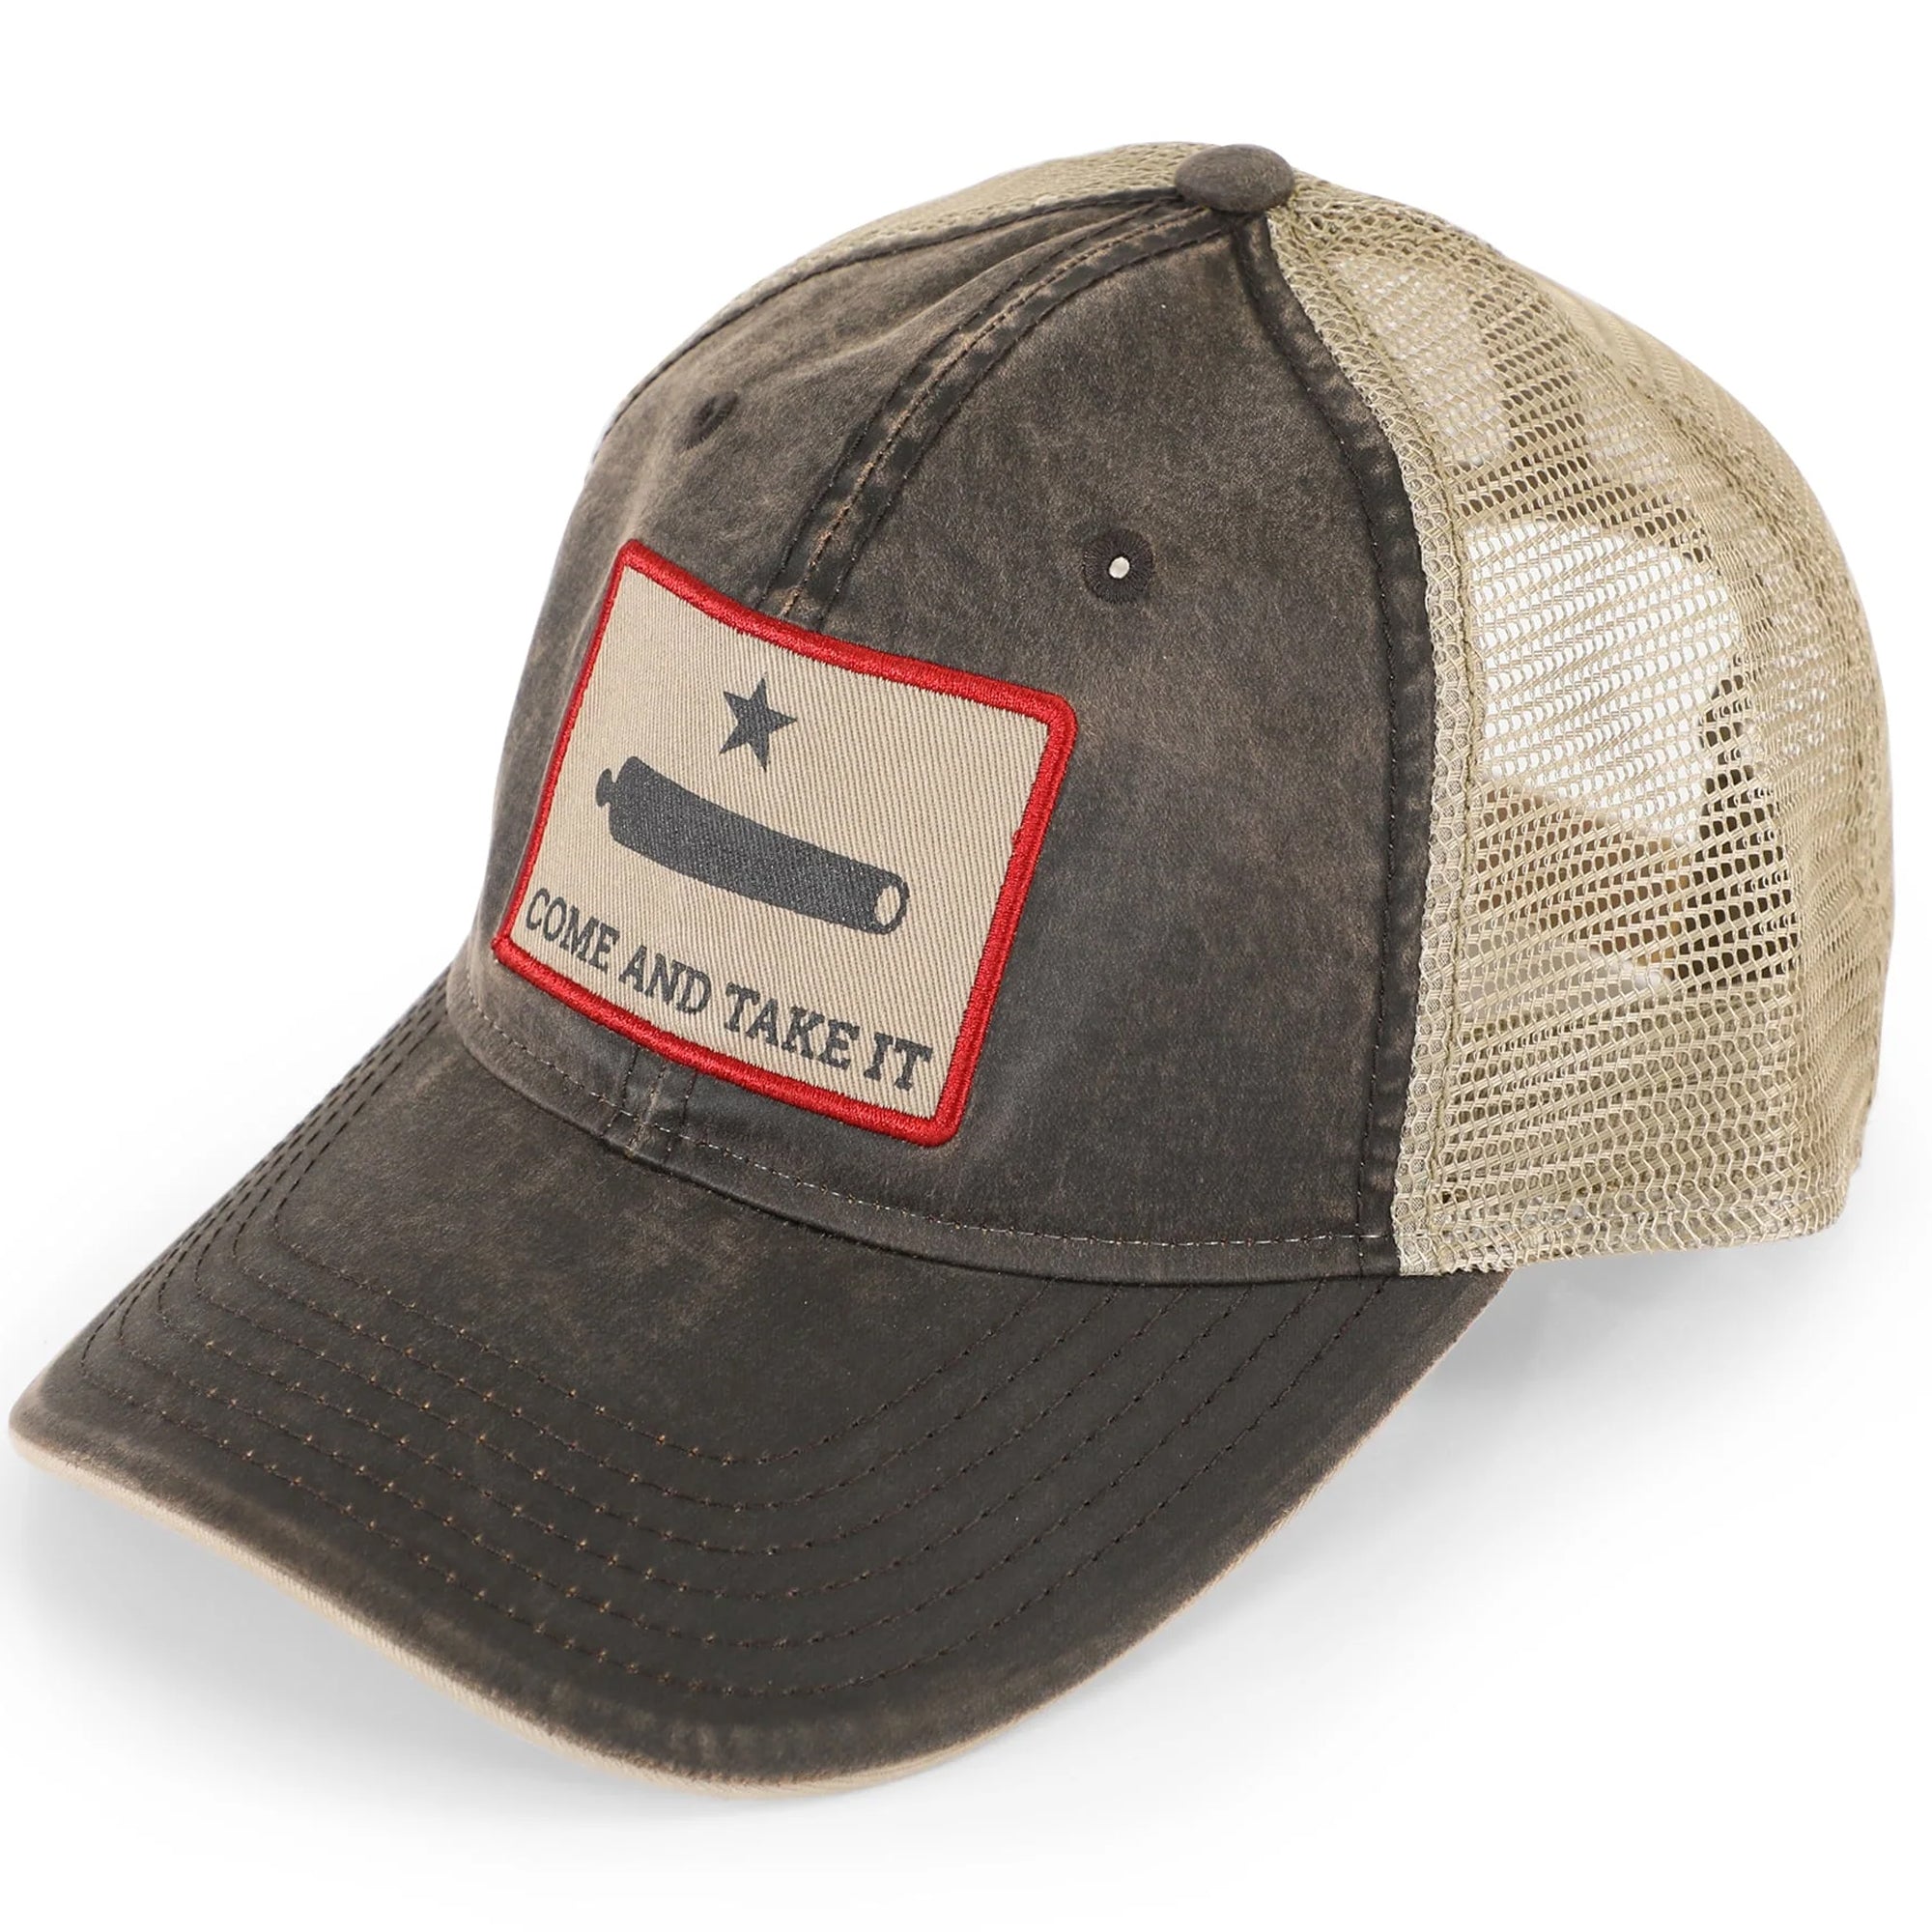 Grunt Style Come And Take It Texas Pride Snapback Hat - Brown/Sand Grunt Style